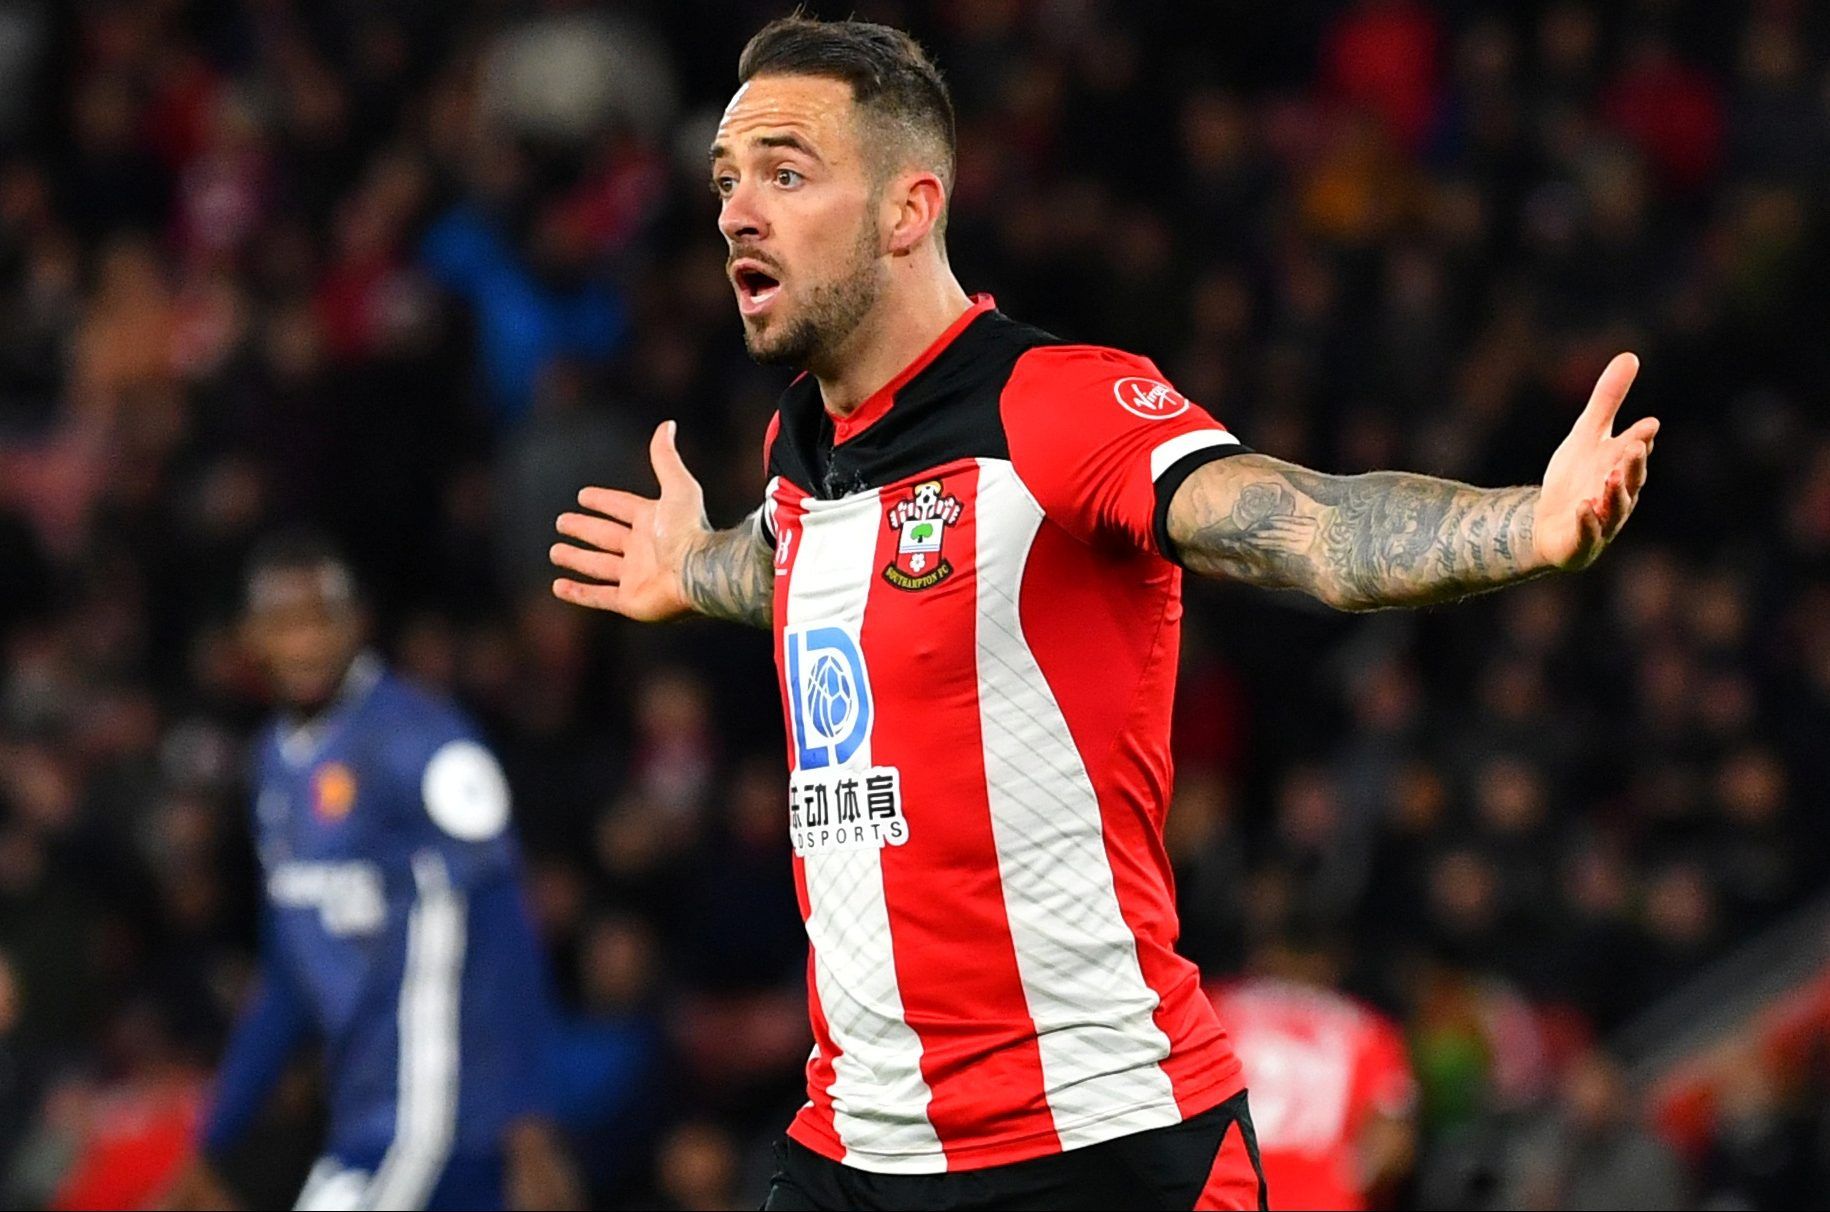 Soccer Football - Premier League - Southampton v Watford - St Mary's Stadium, Southampton, Britain - November 30, 2019  Southampton's Danny Ings reacts     REUTERS/Dylan Martinez  EDITORIAL USE ONLY. No use with unauthorized audio, video, data, fixture lists, club/league logos or 